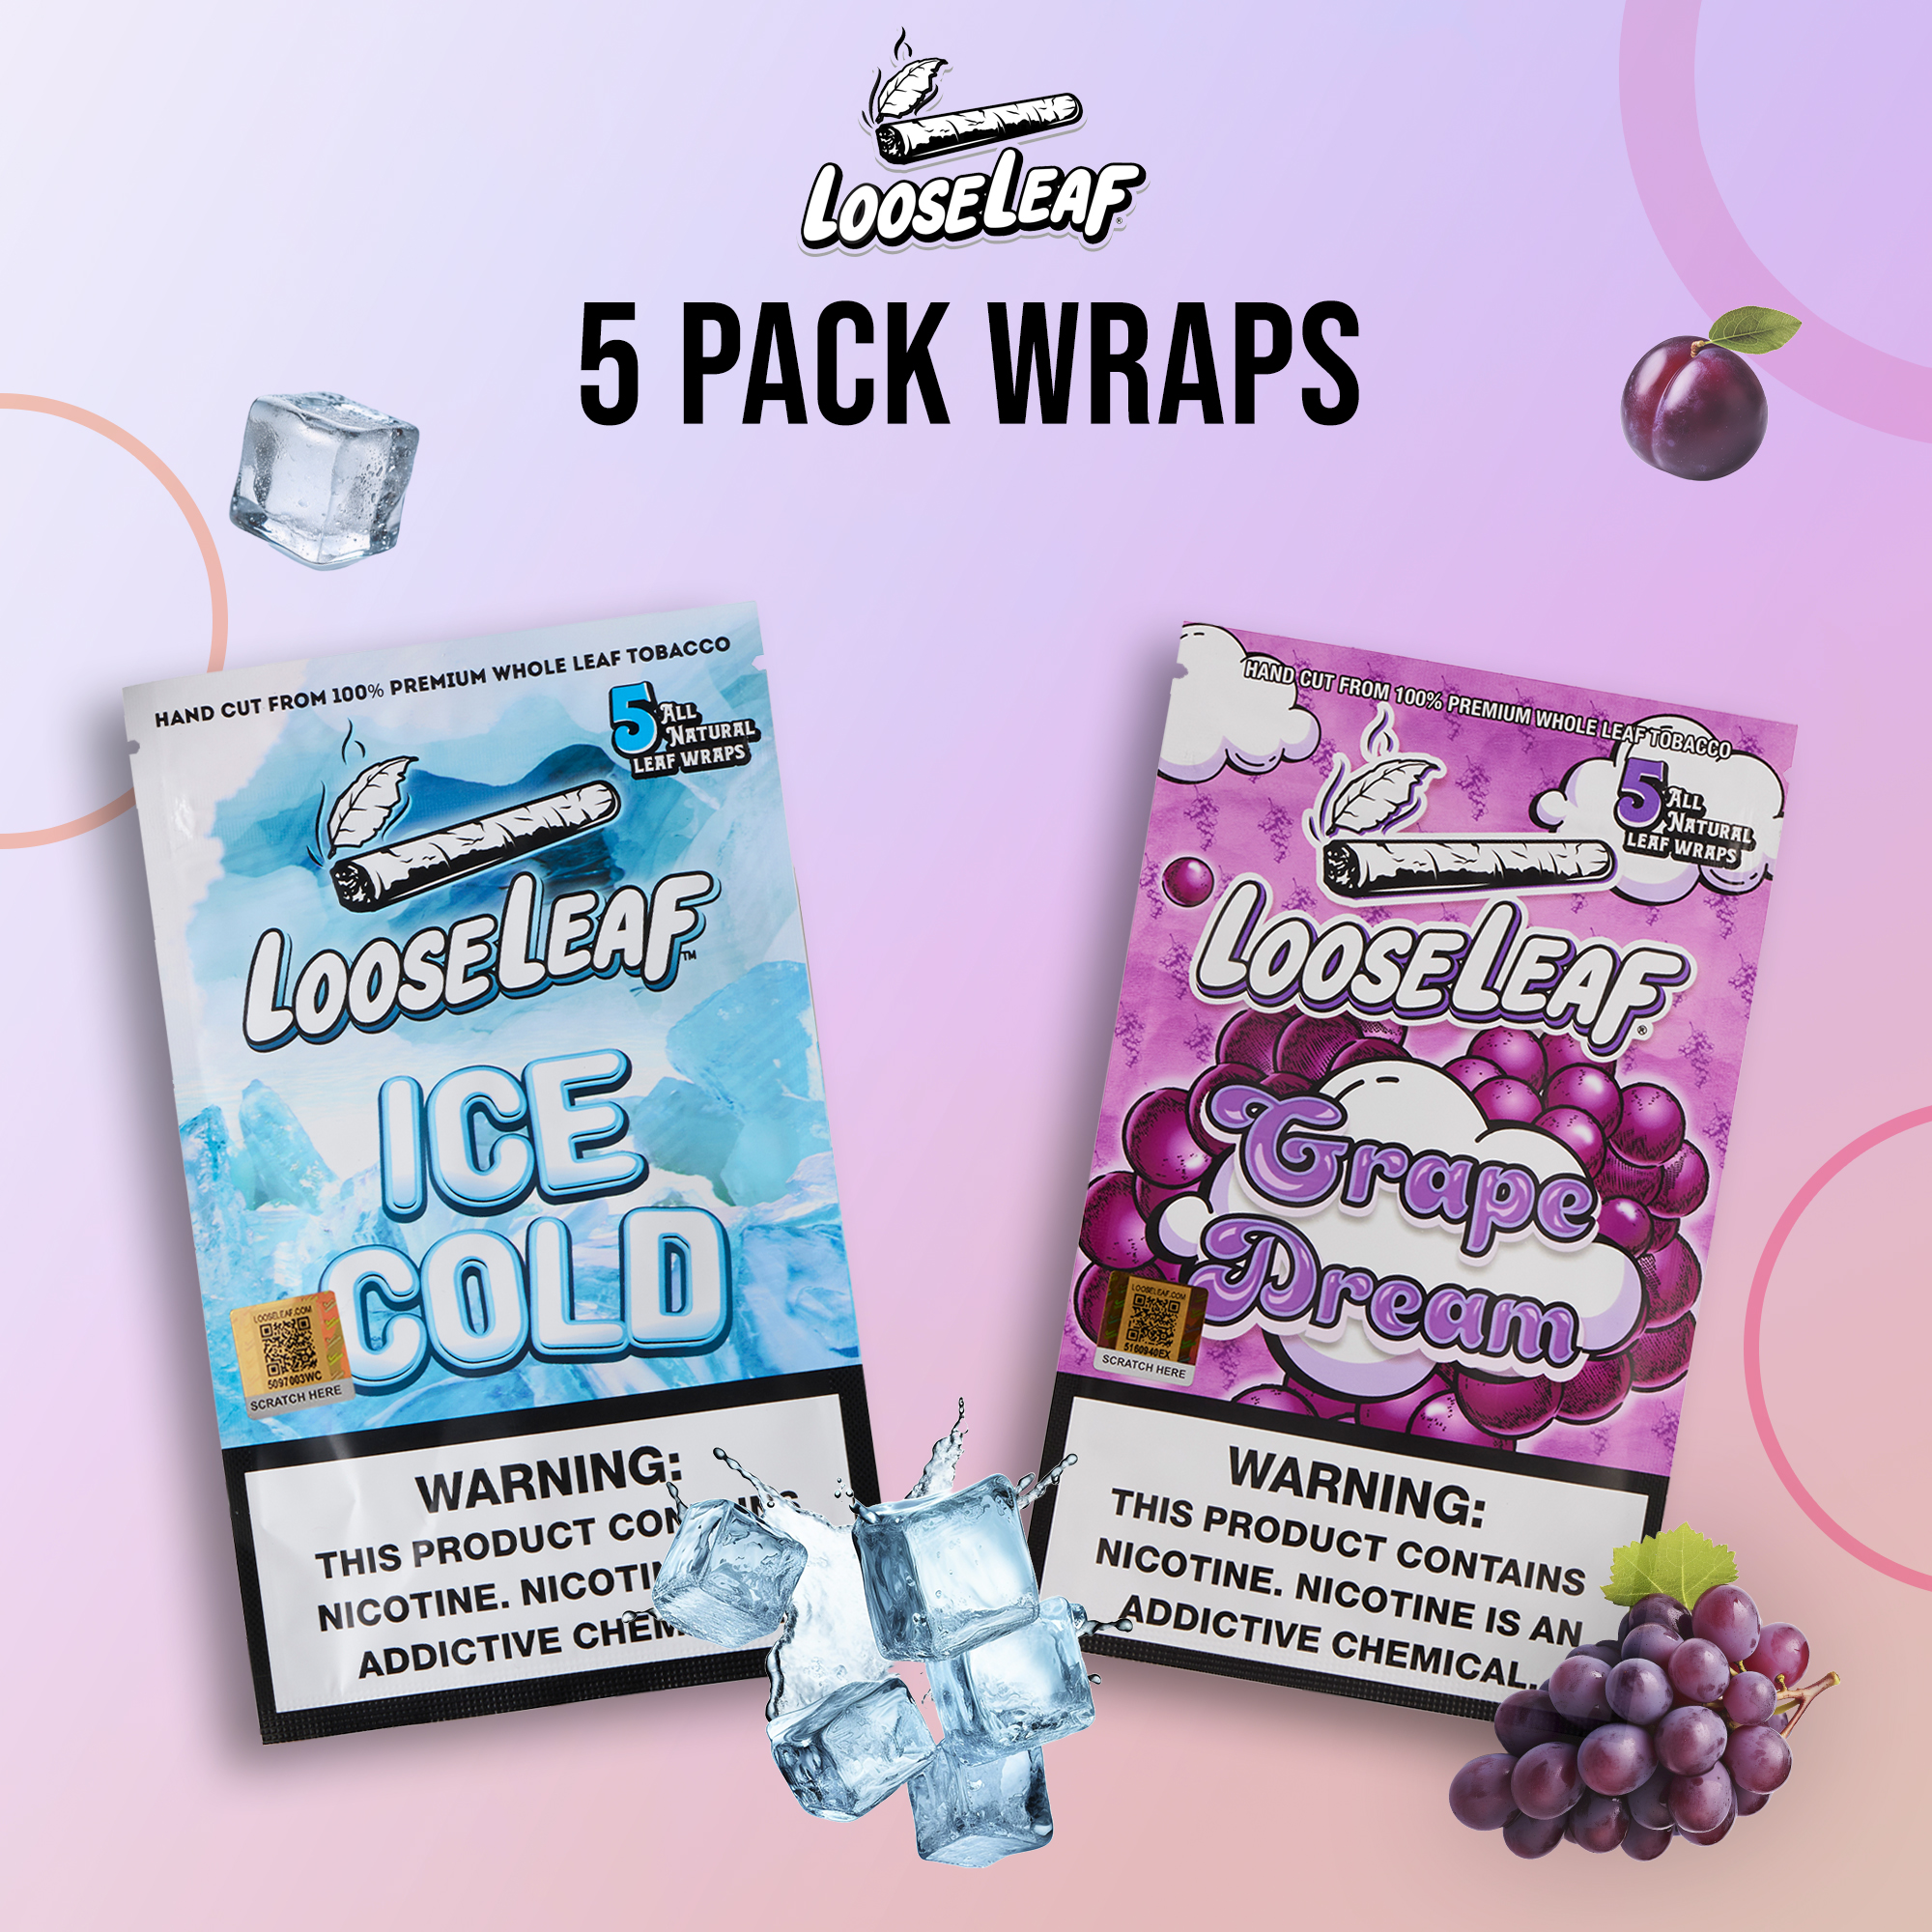 5 Pack Wraps